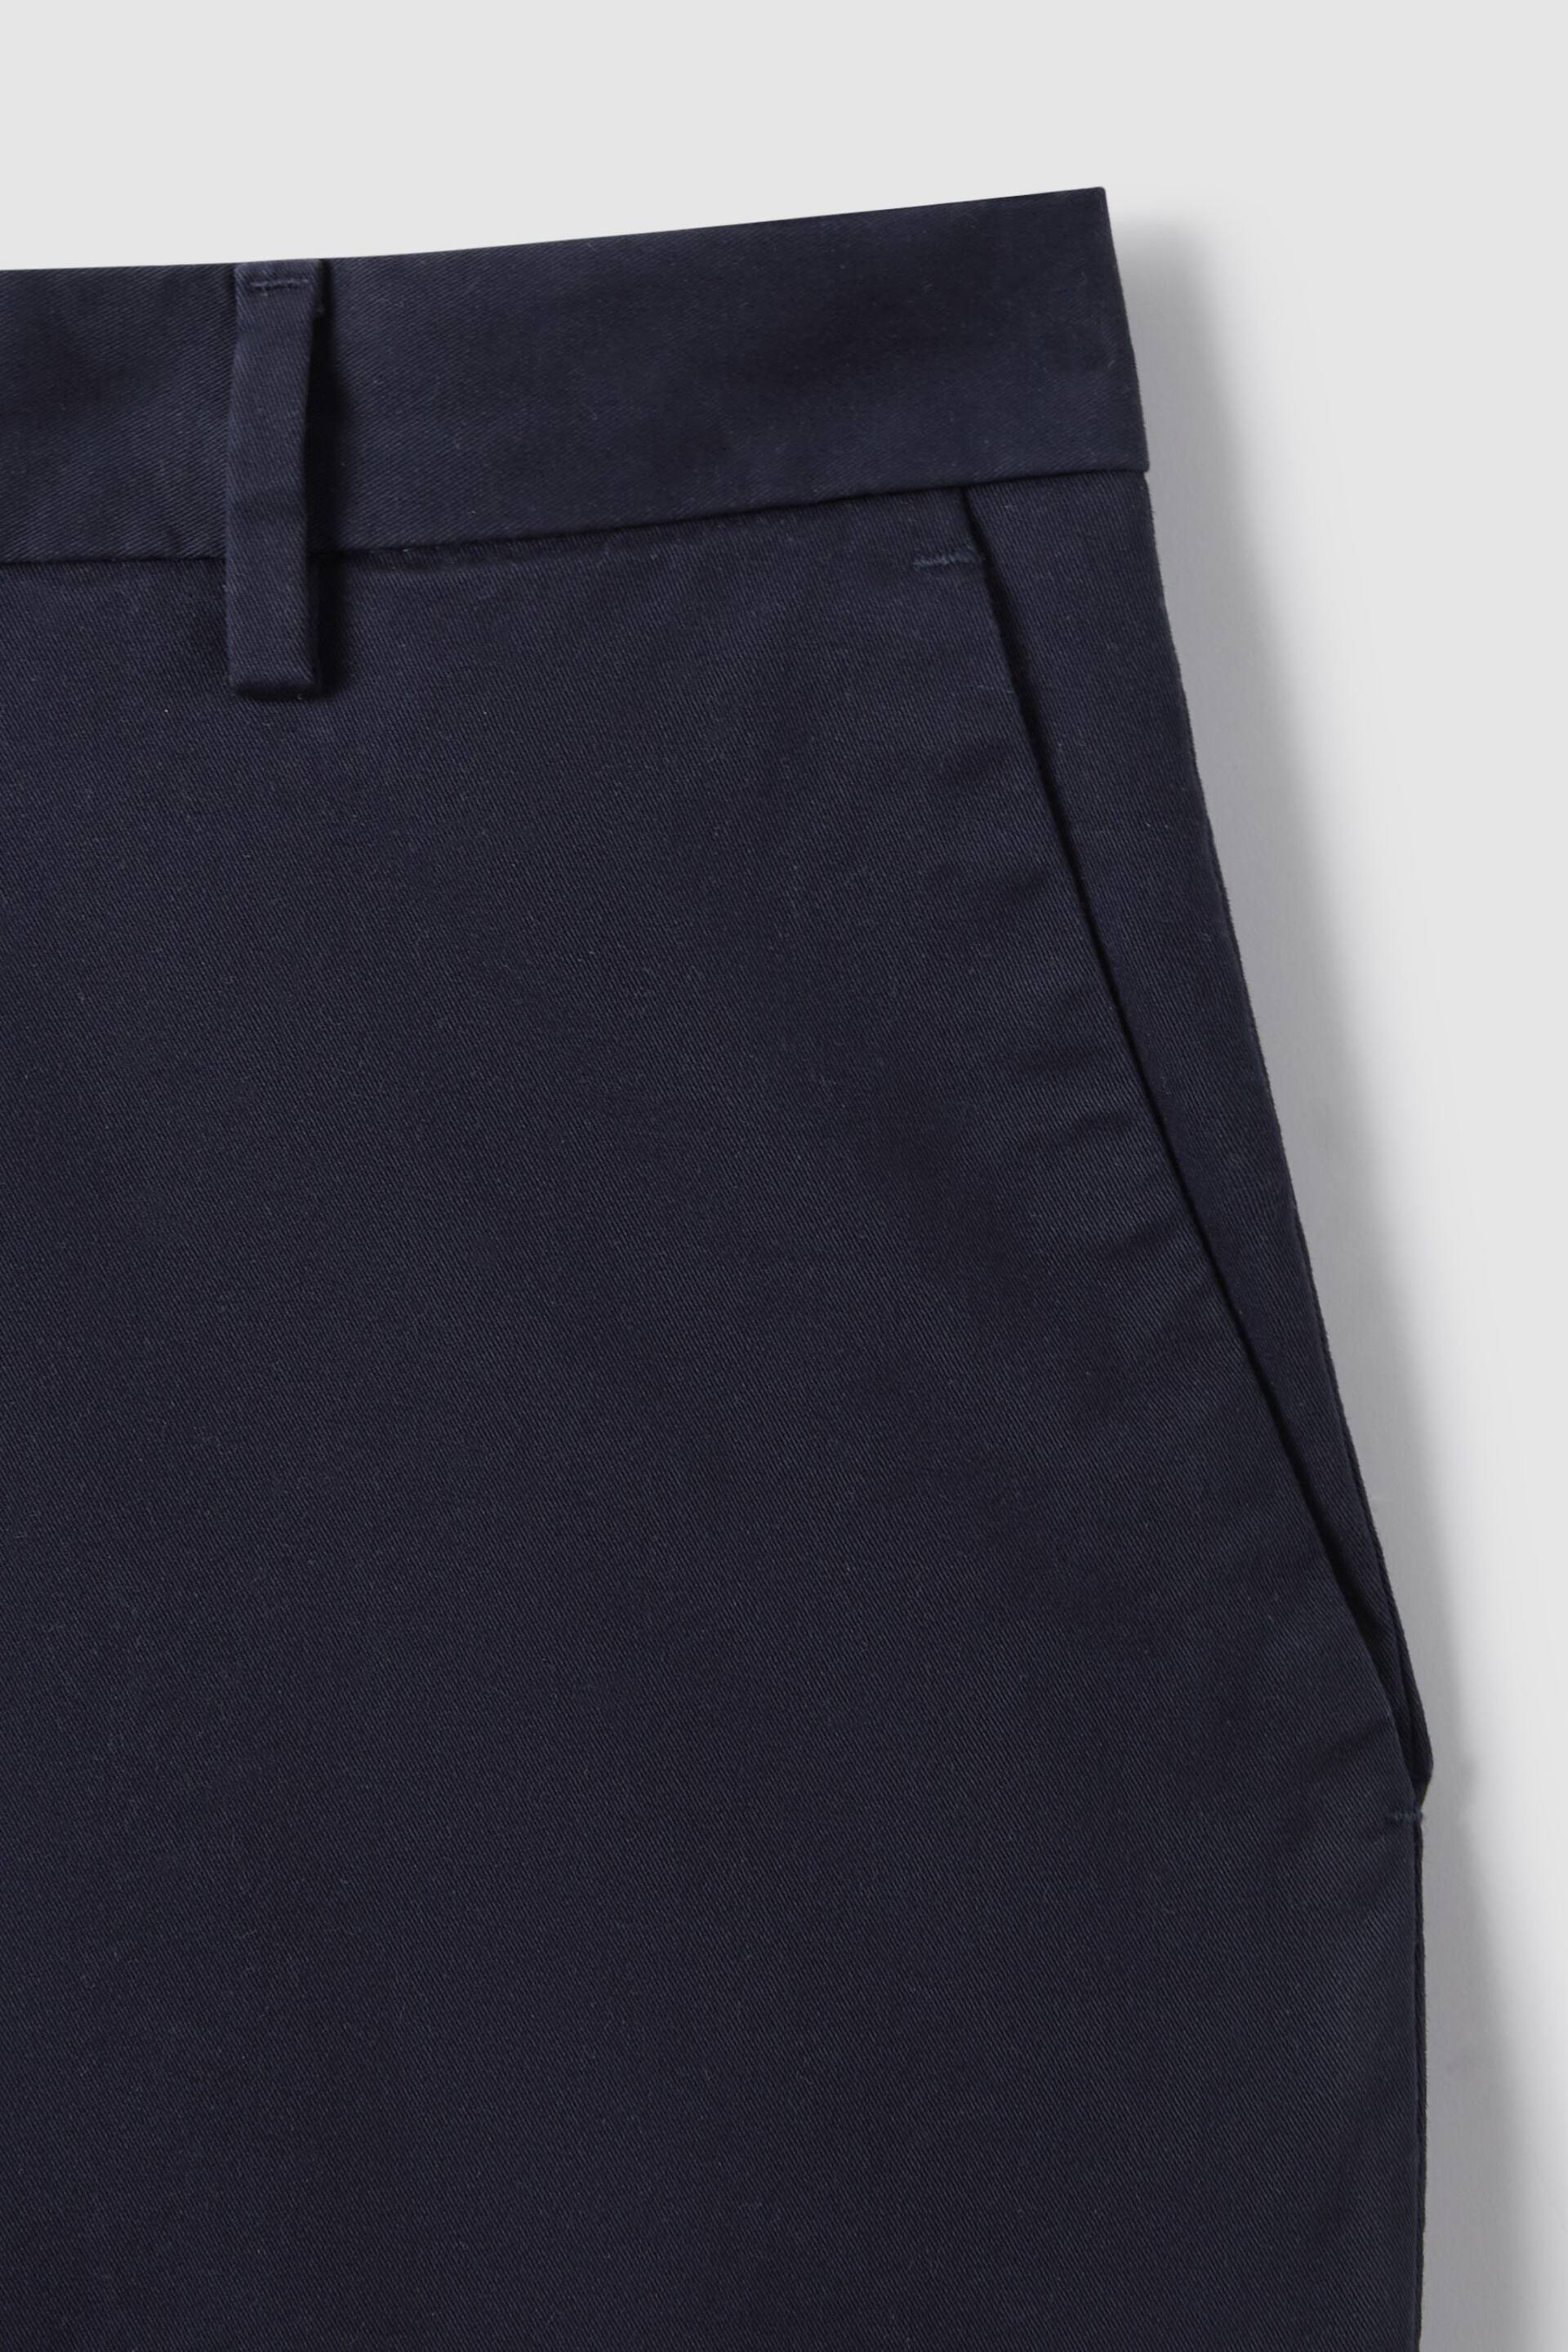 Reiss Navy Wicket Modern Fit Cotton Blend Chino Shorts - Image 5 of 6